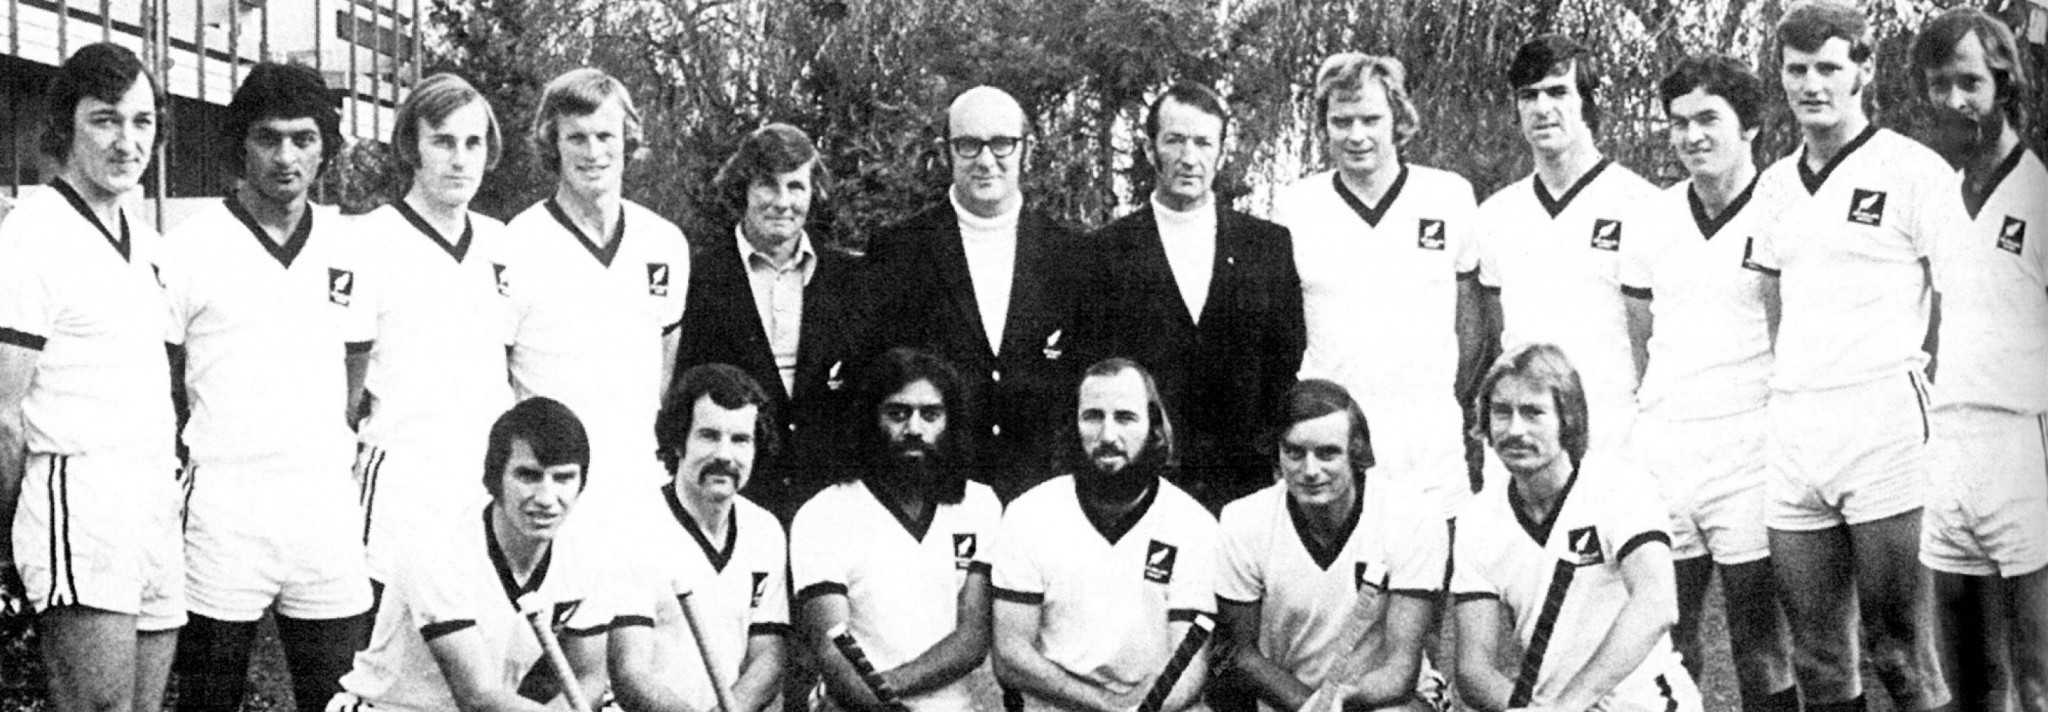 Gillespie, coach of New Zealand's 1976 Olympic hockey champions, dies aged 87